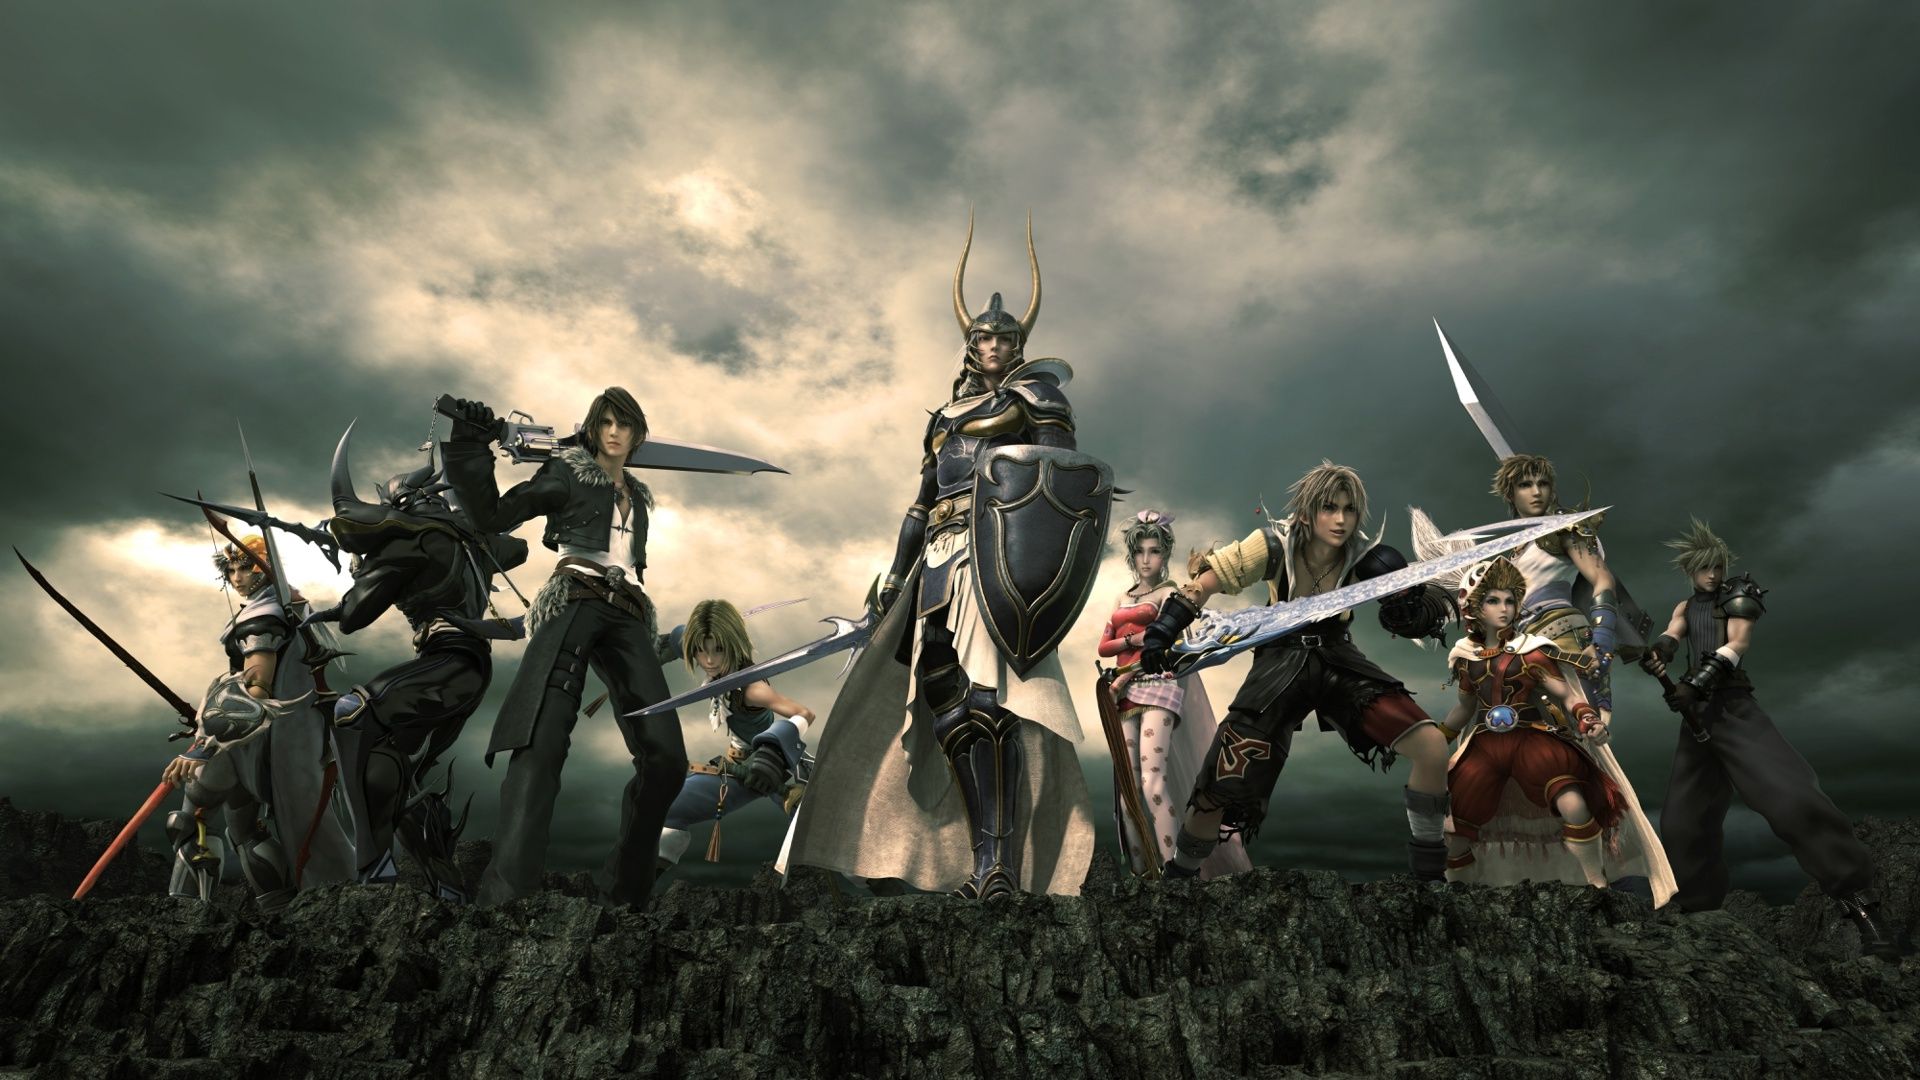 Final Fantasy HD 1920x1080 Wallpapers, 1920x1080 Wallpapers ...